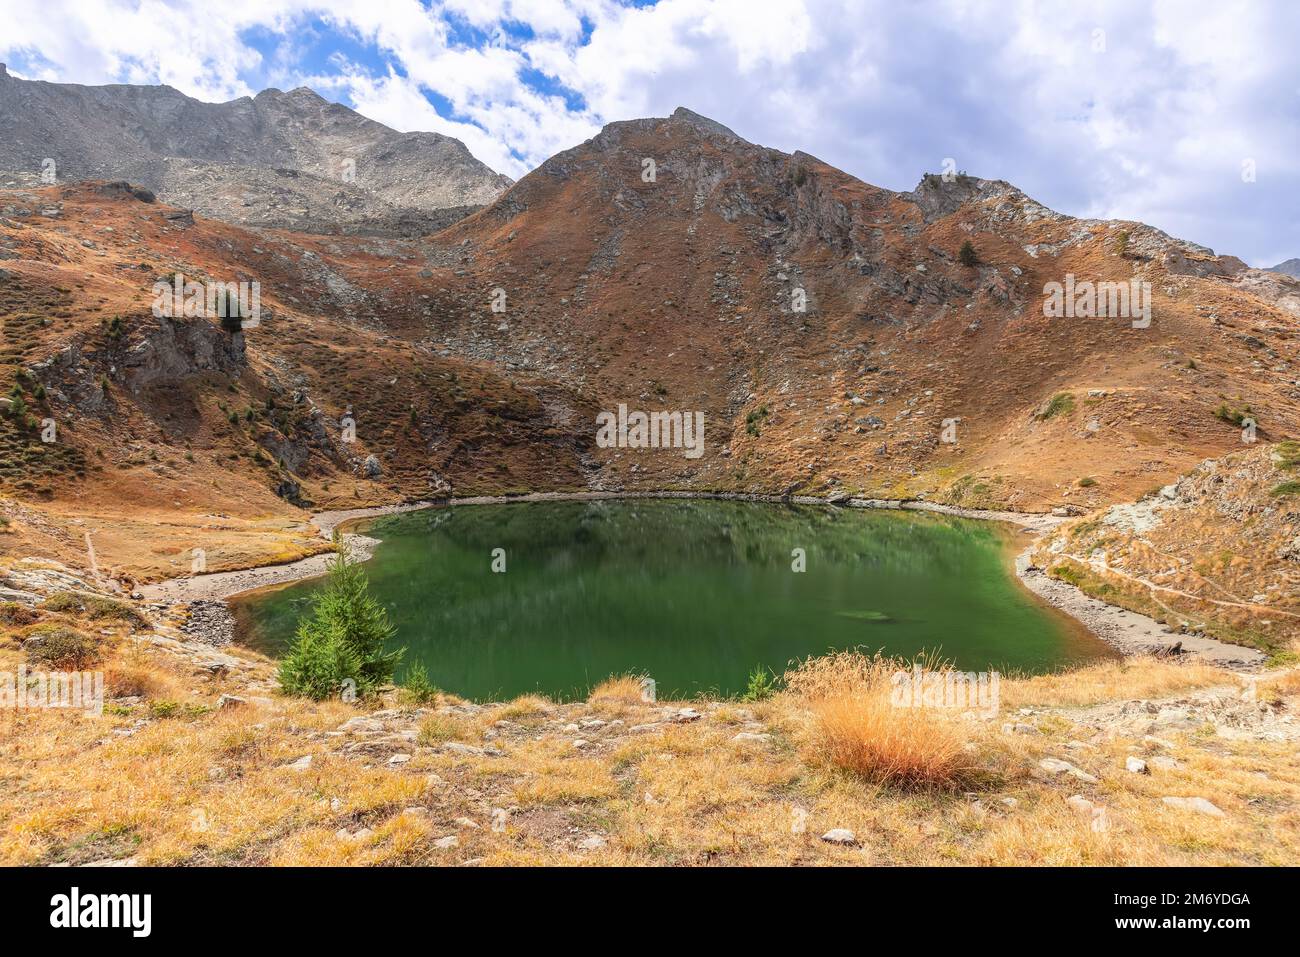 Emerald water of Lake Loie (Lago di Loie) surrounded by granite alpine rocks with autumn withered yellow grass in Parco Nazionale Gran Paradiso Stock Photo